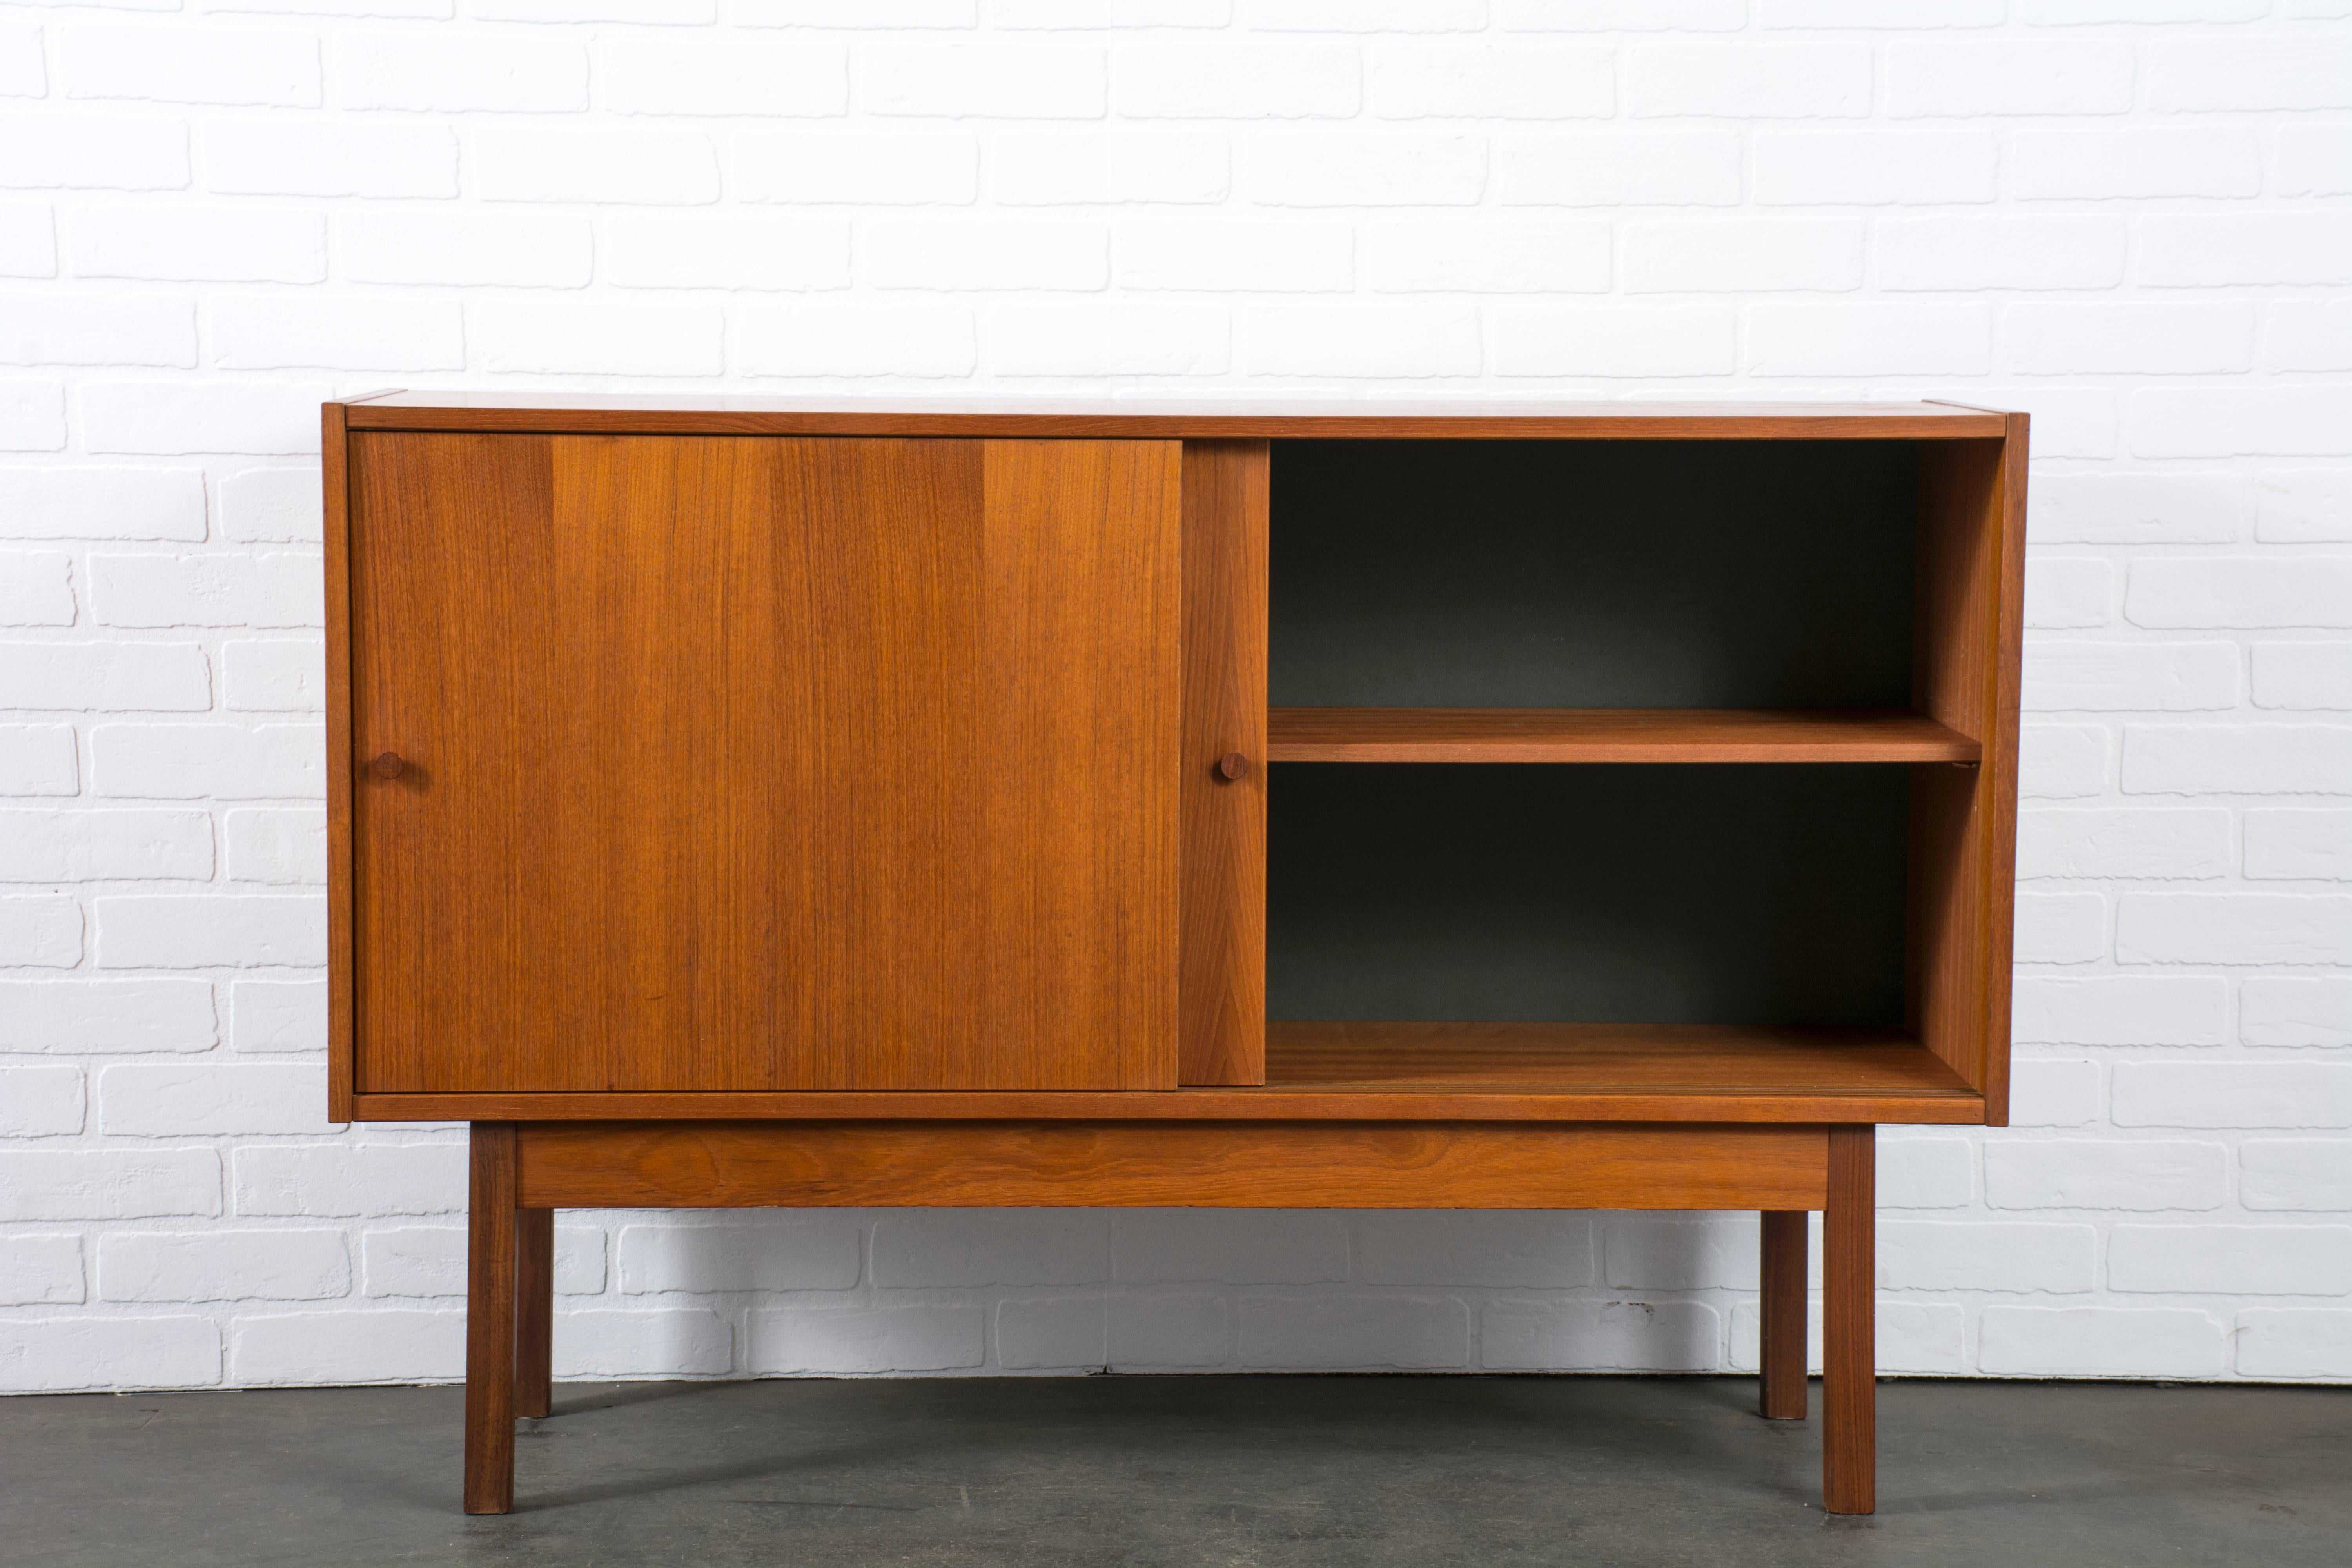 This vintage Mid-Century teak sideboard features two sliding doors and one shelf.
